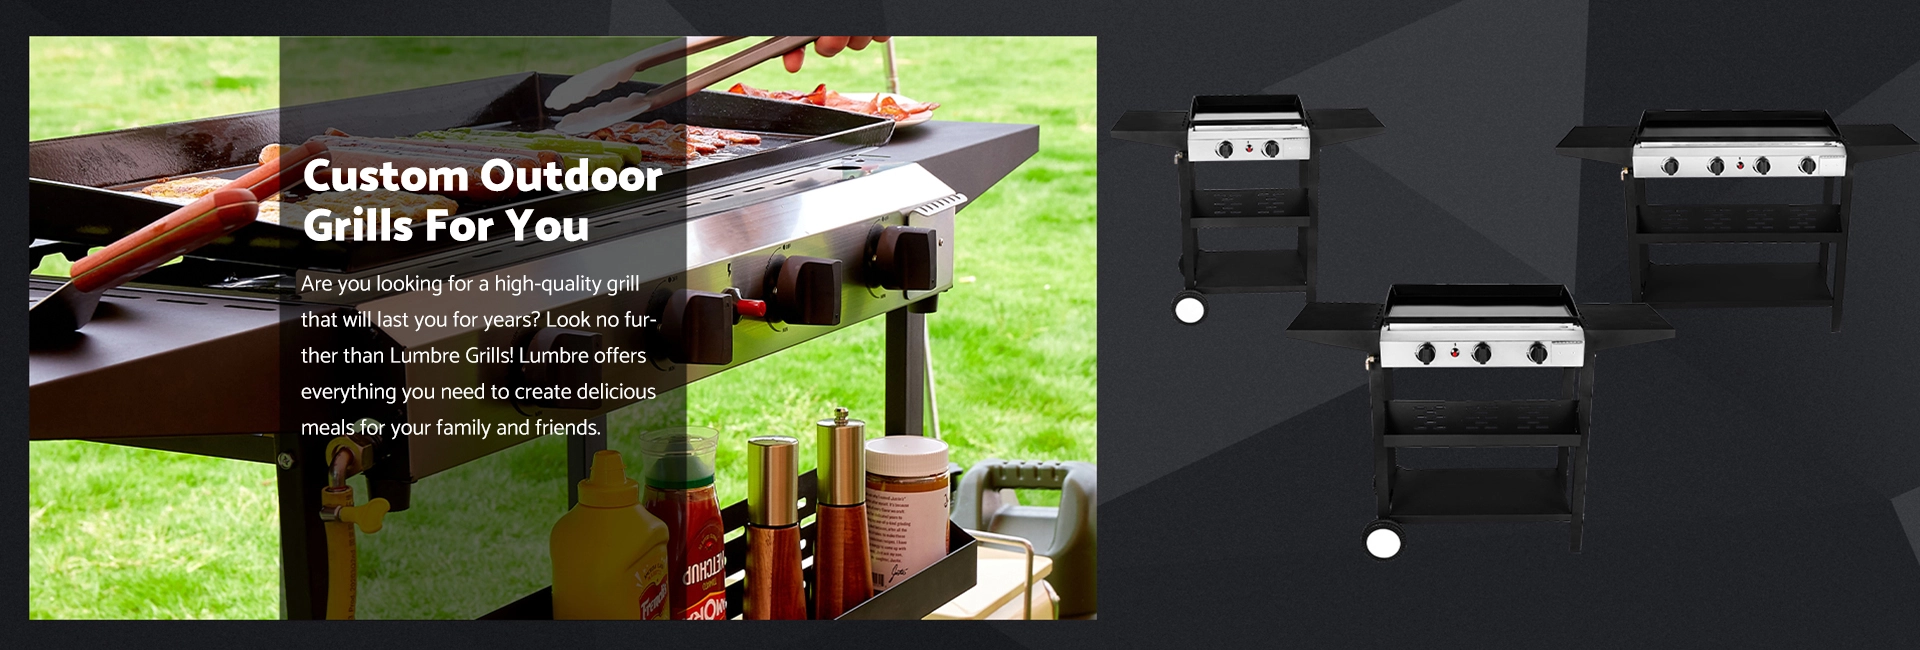 Custom Outdoor Grills For You